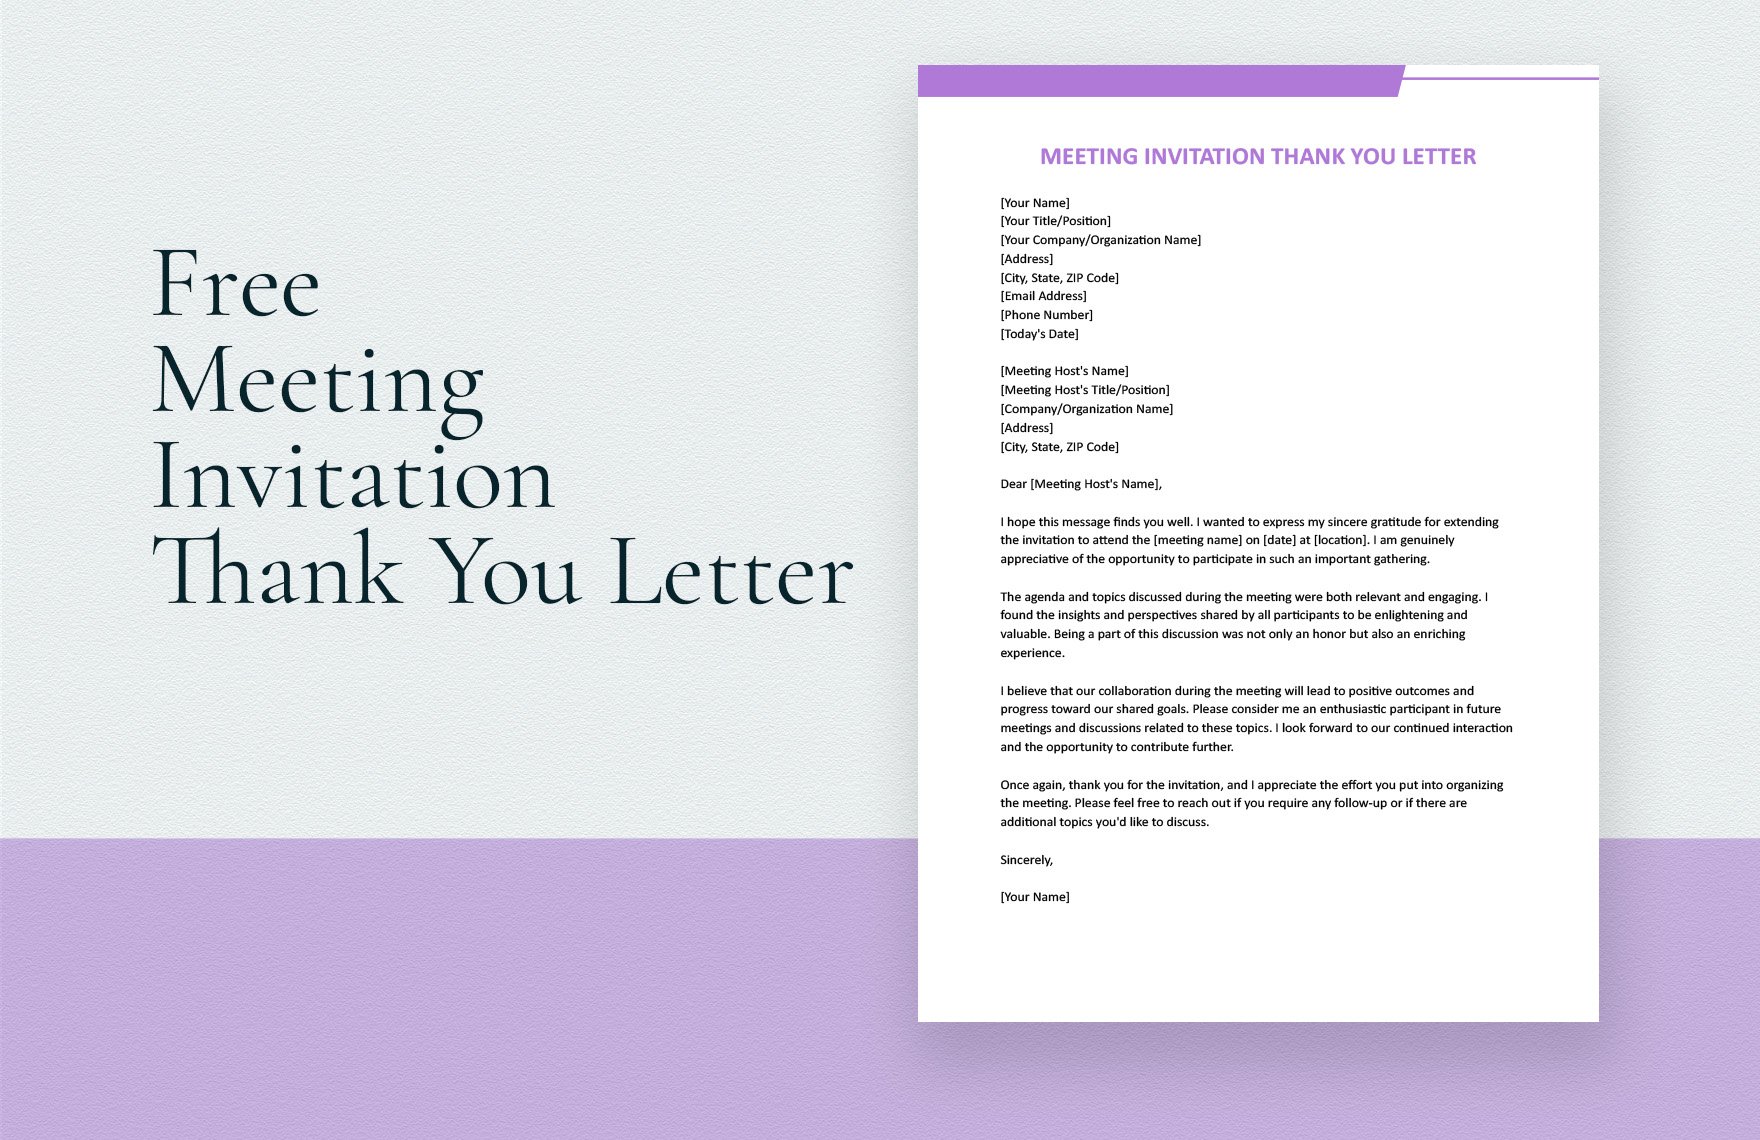 Free Meeting Invitation Thank You Letter